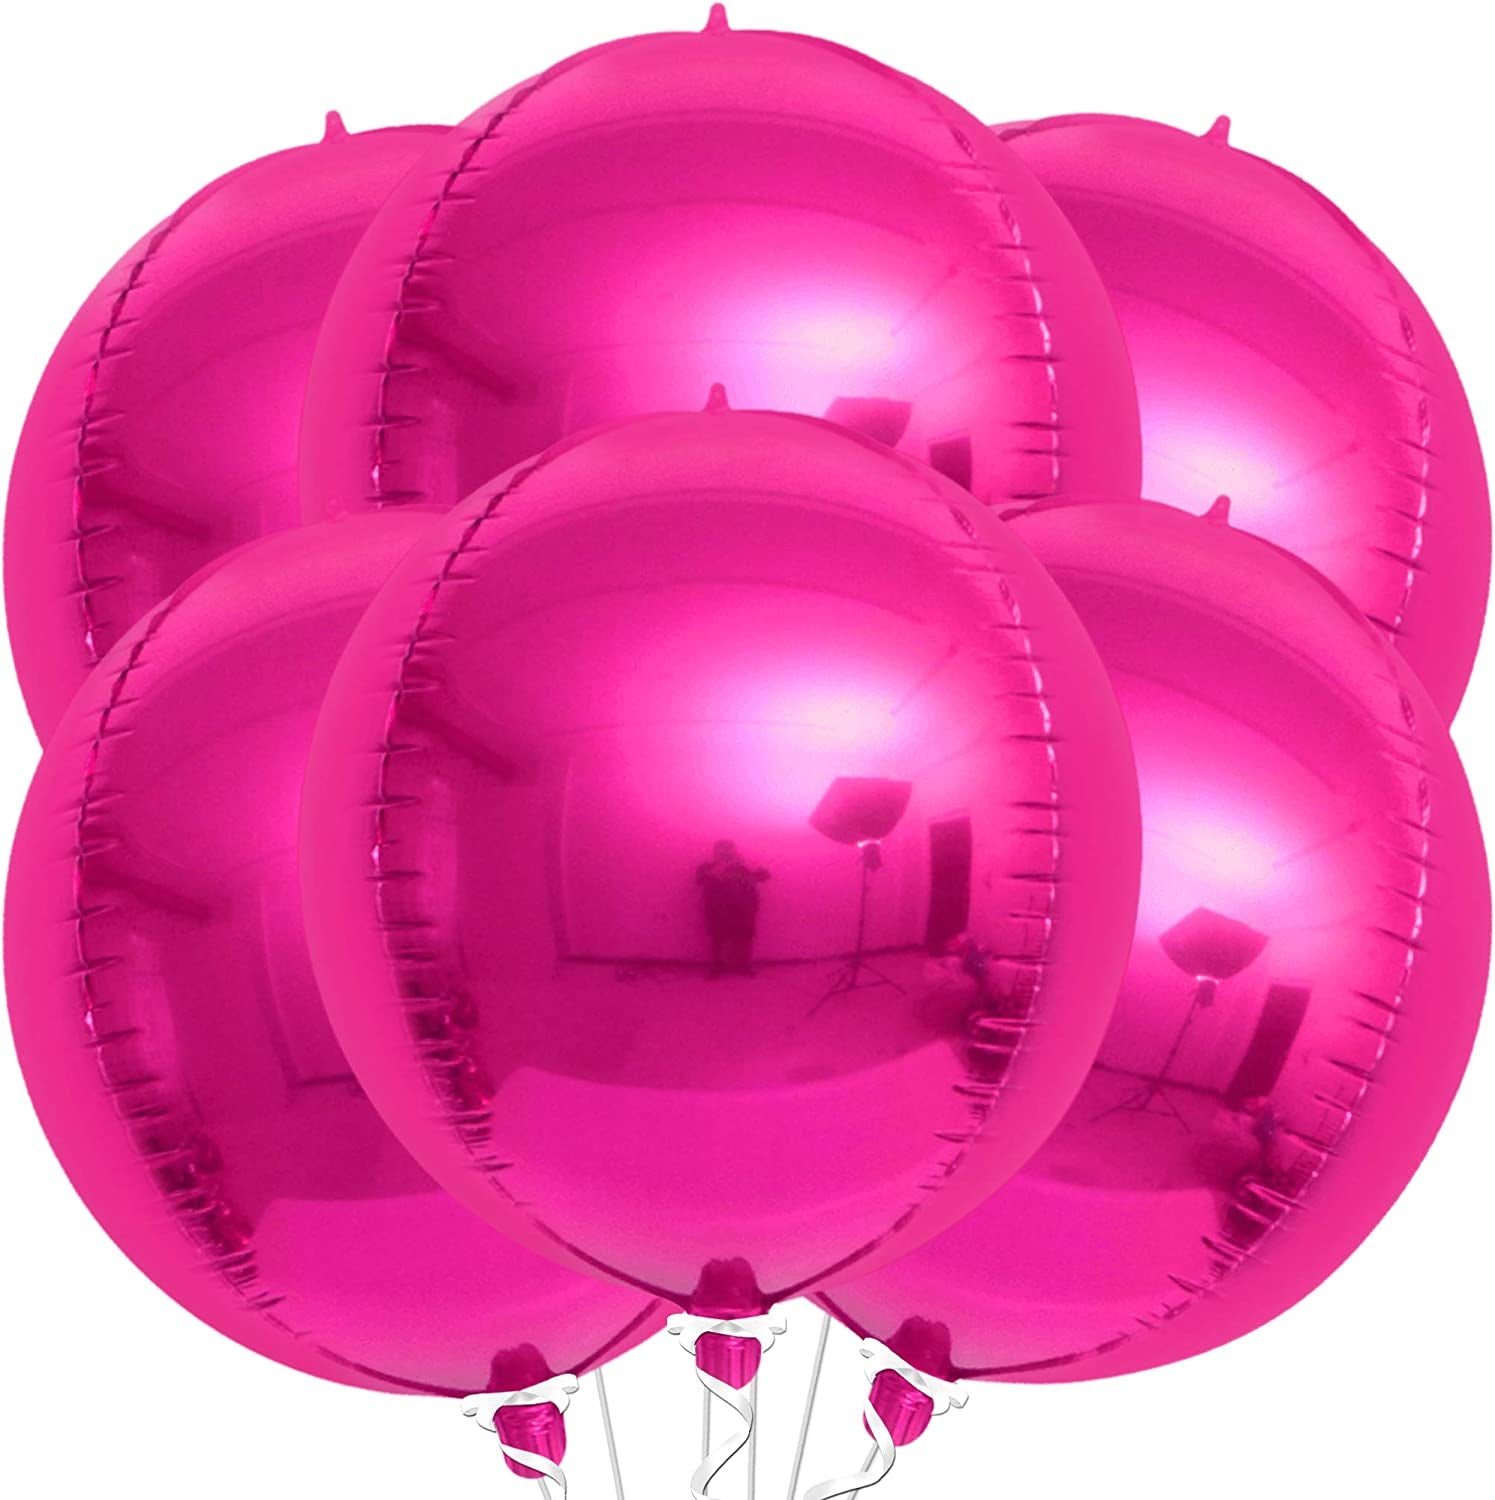 , Big Hot Pink Balloons - 22 Inch, Pack of 6 | Hot Pink Foil Balloons for Hot Pink Party Decorations | 4D Sphere Metallic Pink Balloons, Hot Pink Birthday Decorations | Hot Pink Mylar Balloons